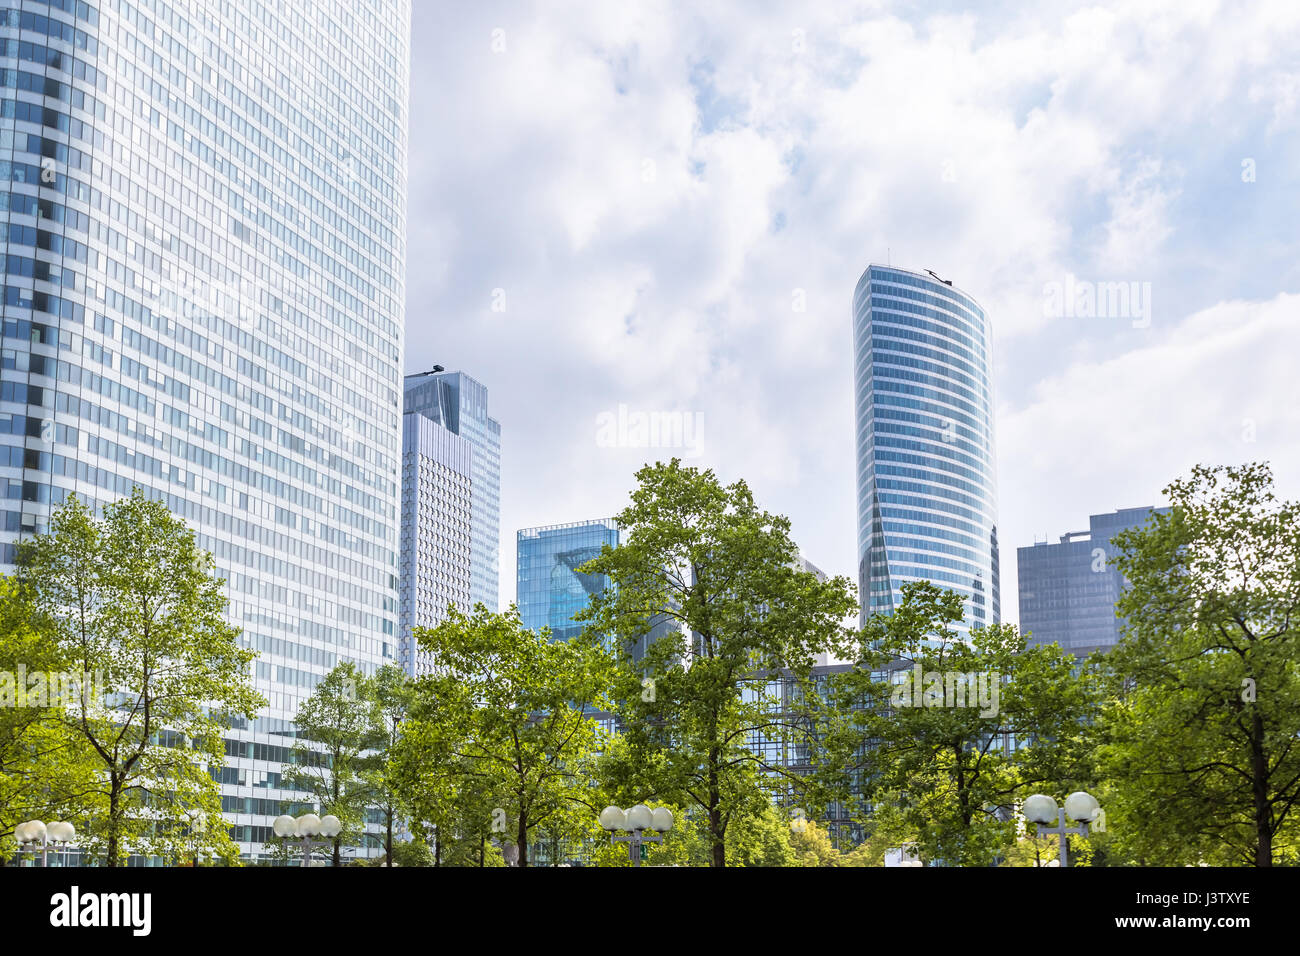 Modern business district and financial center with green trees and foliage and skyscrapers with glass facade, spring at La Defense, Paris Stock Photo